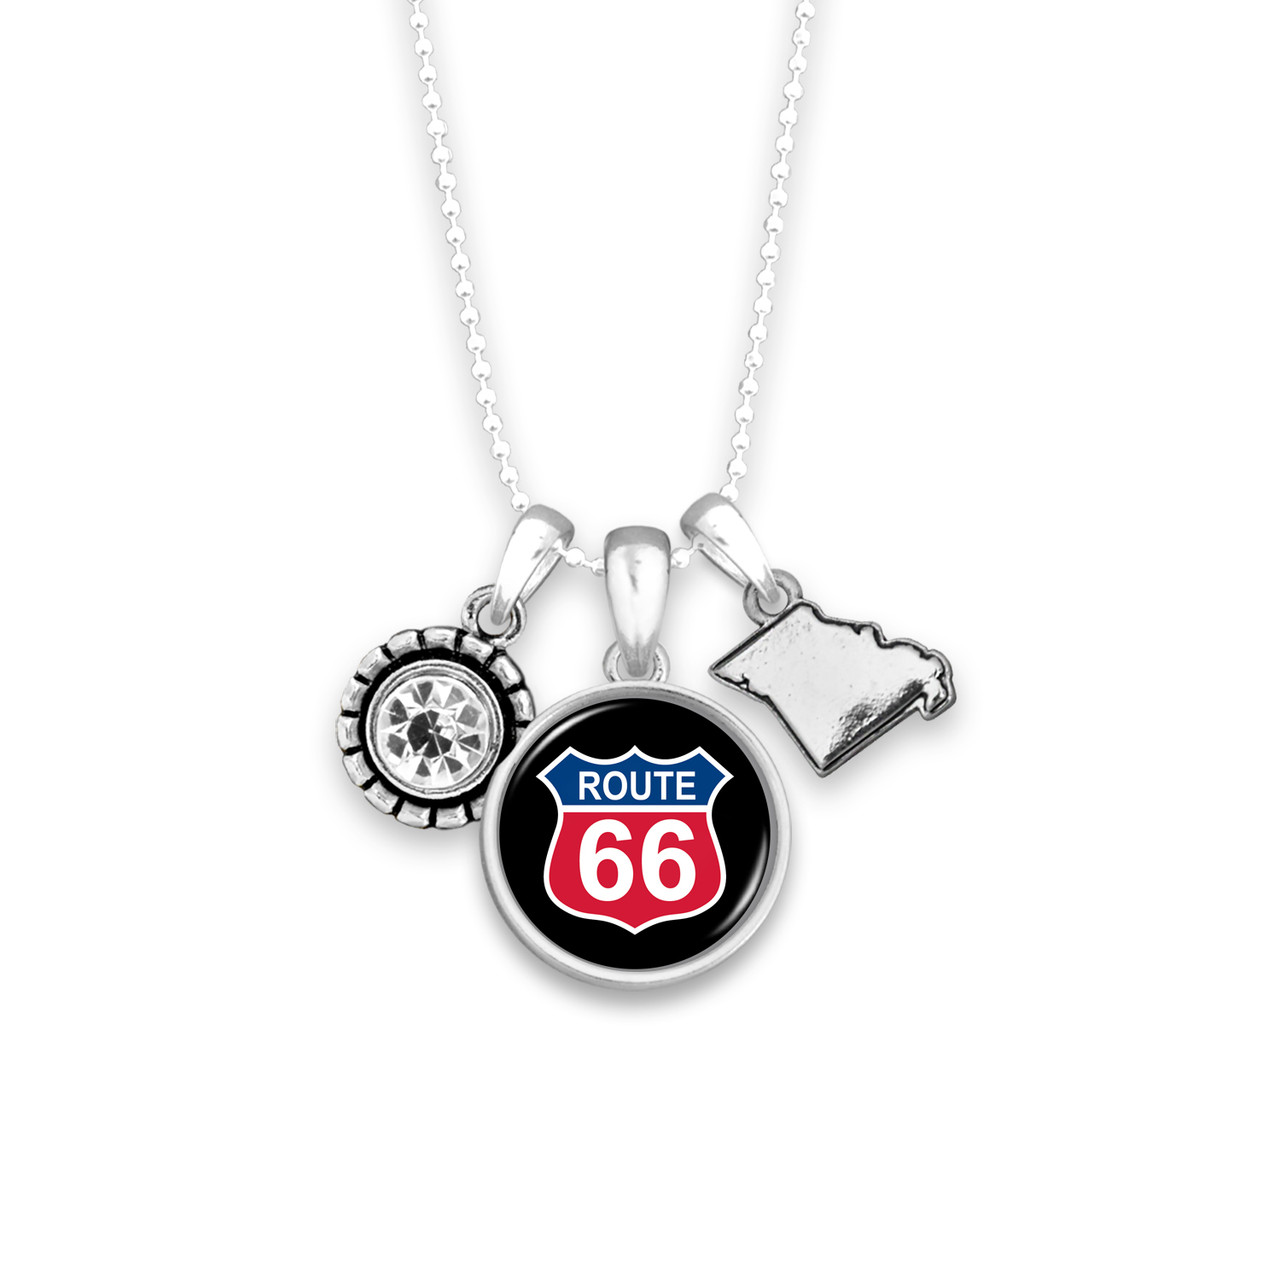 Route 66 Home Sweet School Necklace - Missouri